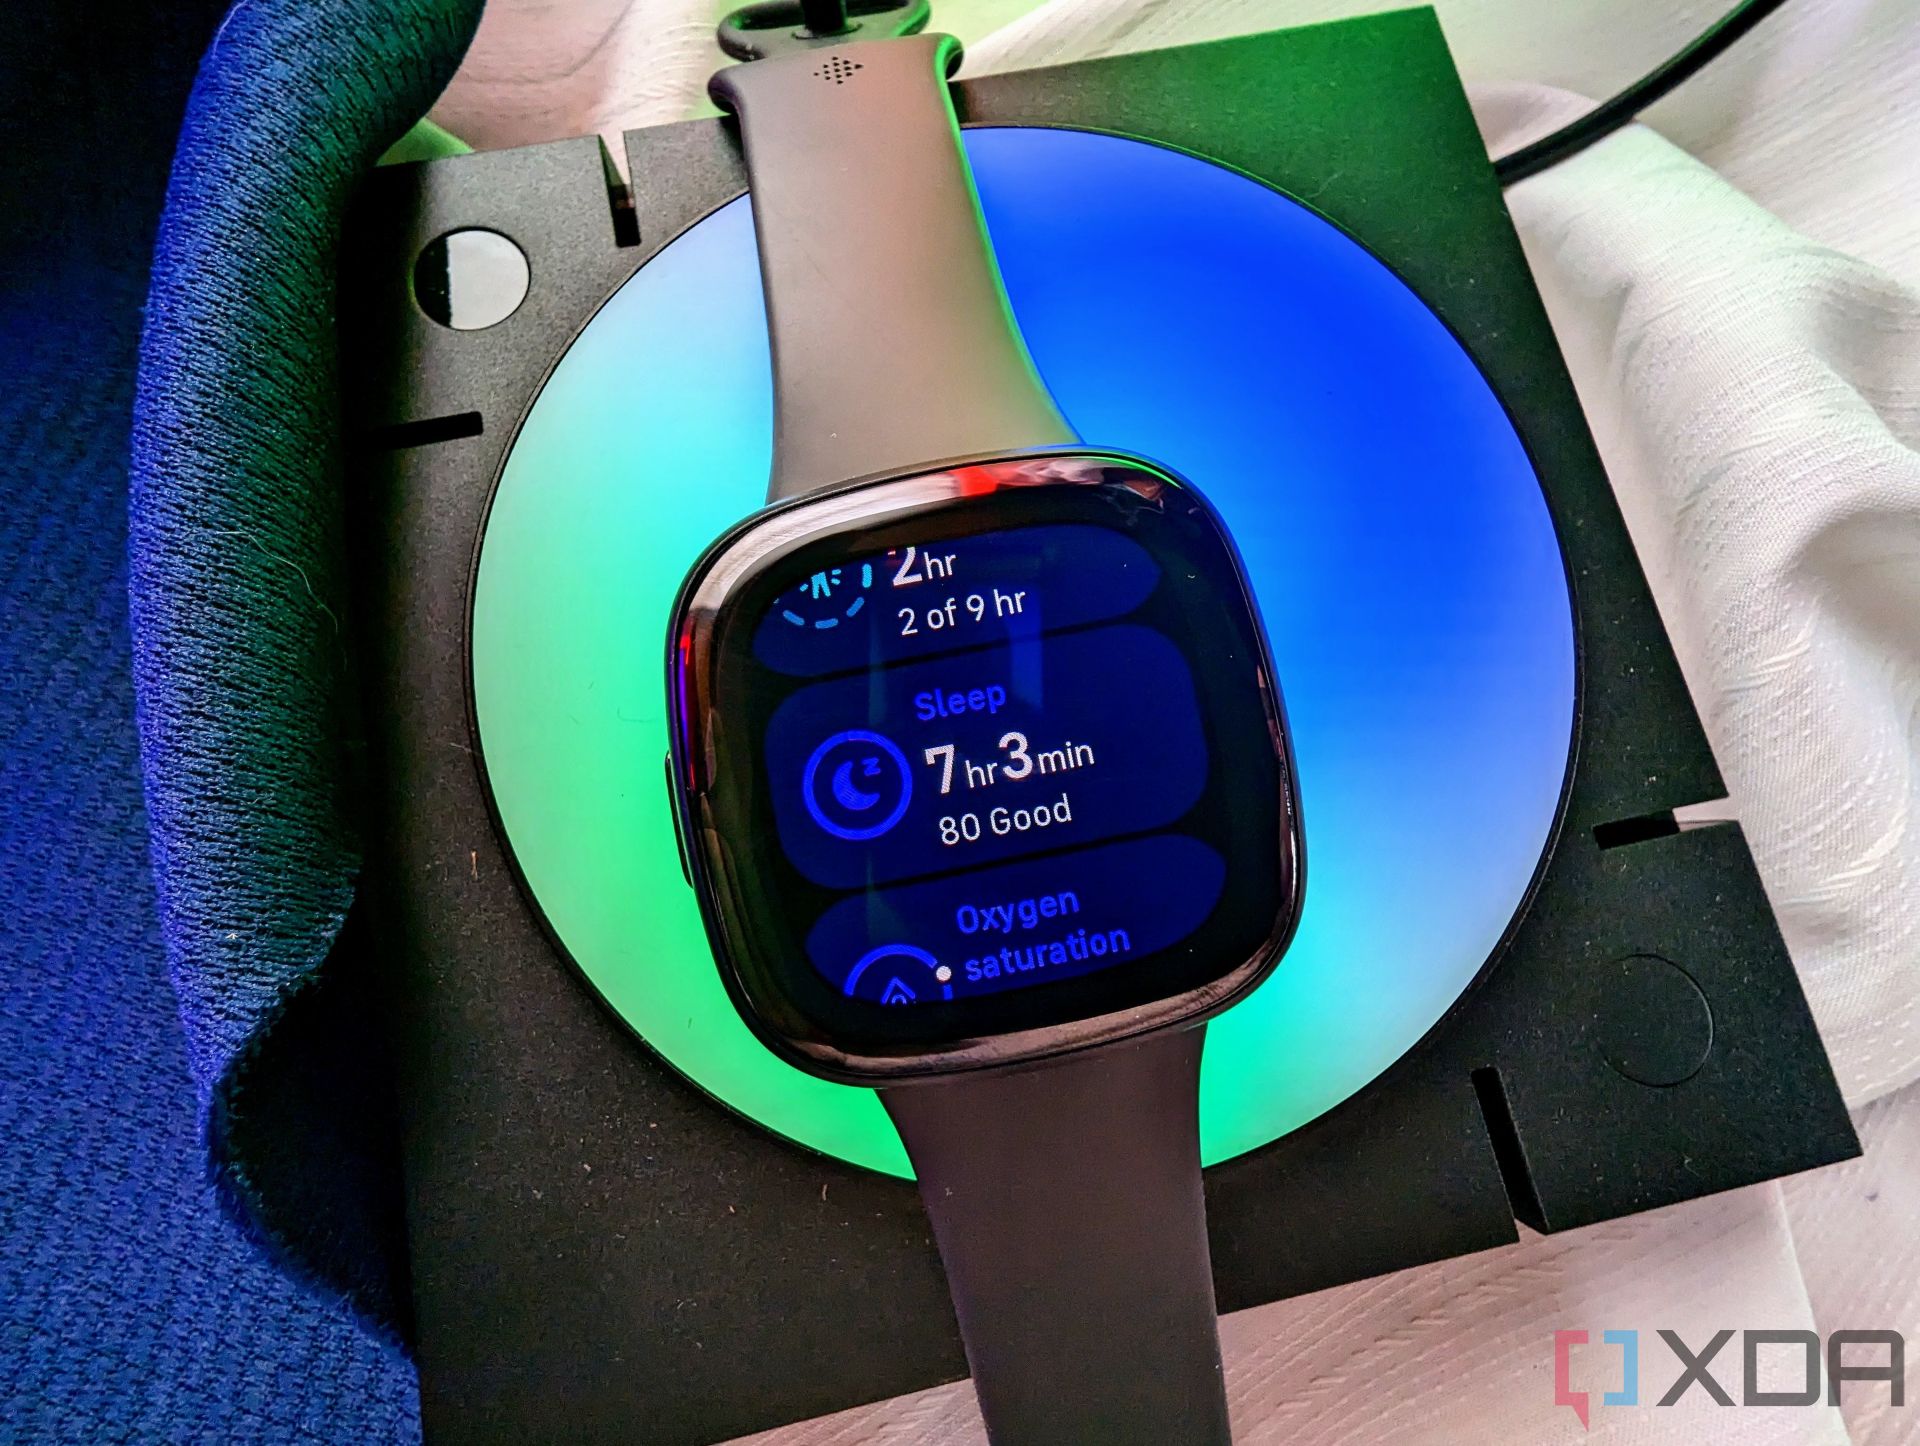 Fitbit Sense 2 review: A smart way to focus on fitness